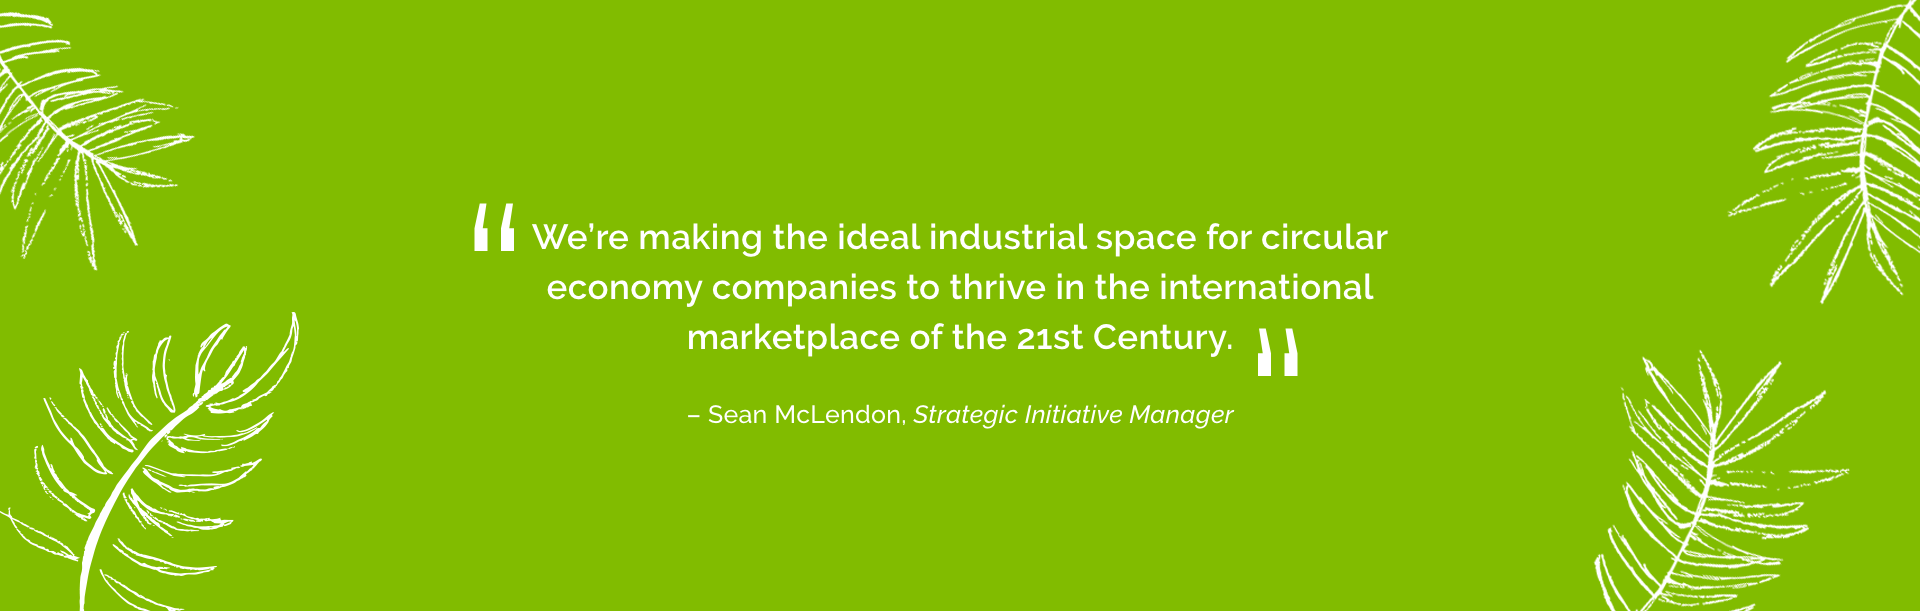 We are making the ideal industrial space for circular economy companies to thrive in the international marketplace of the 21st century.